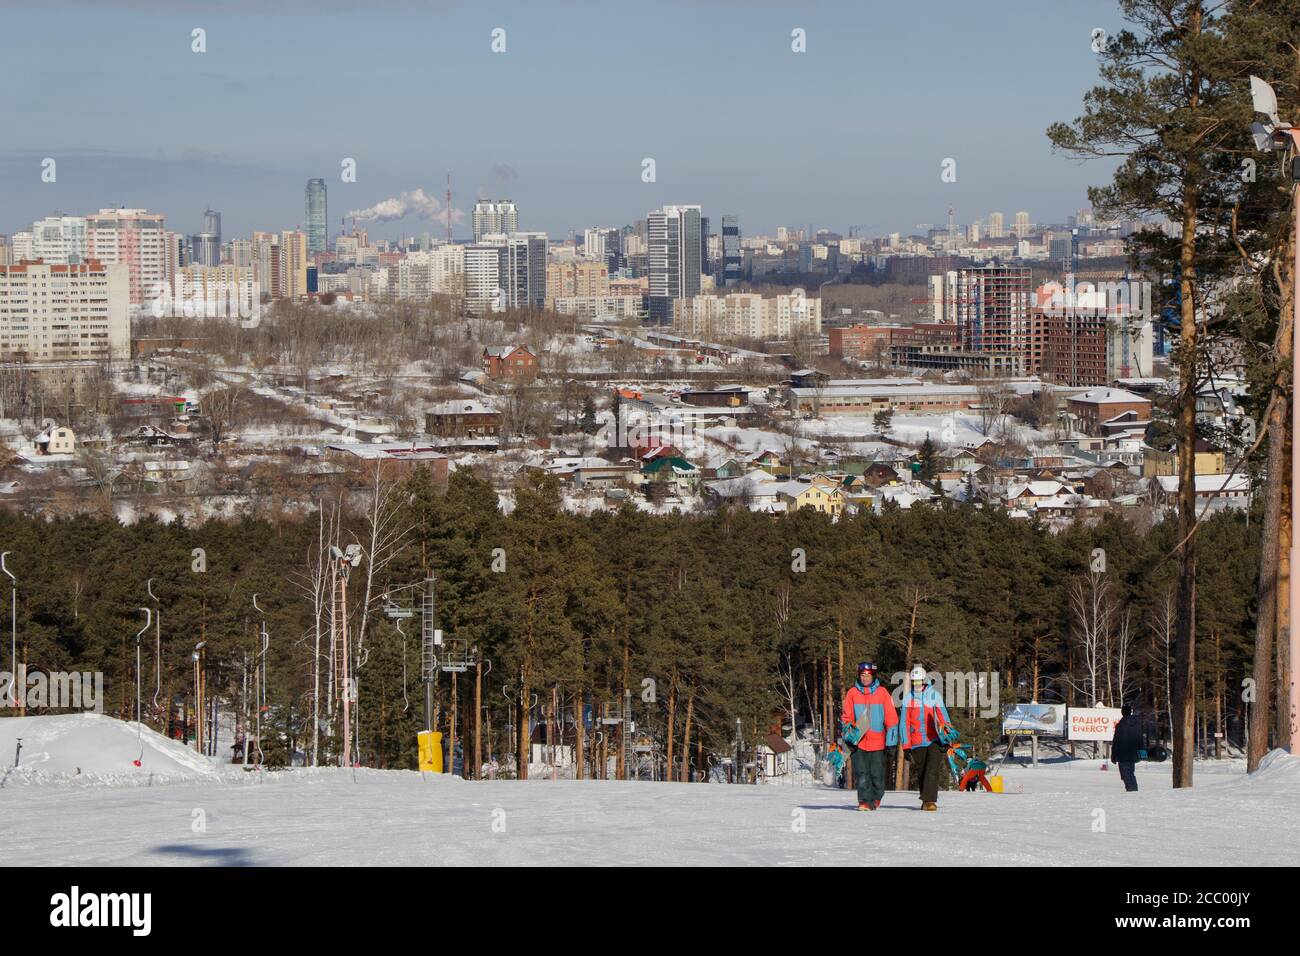 People are on the ski slope and view of the city of Yekaterinburg Stock Photo